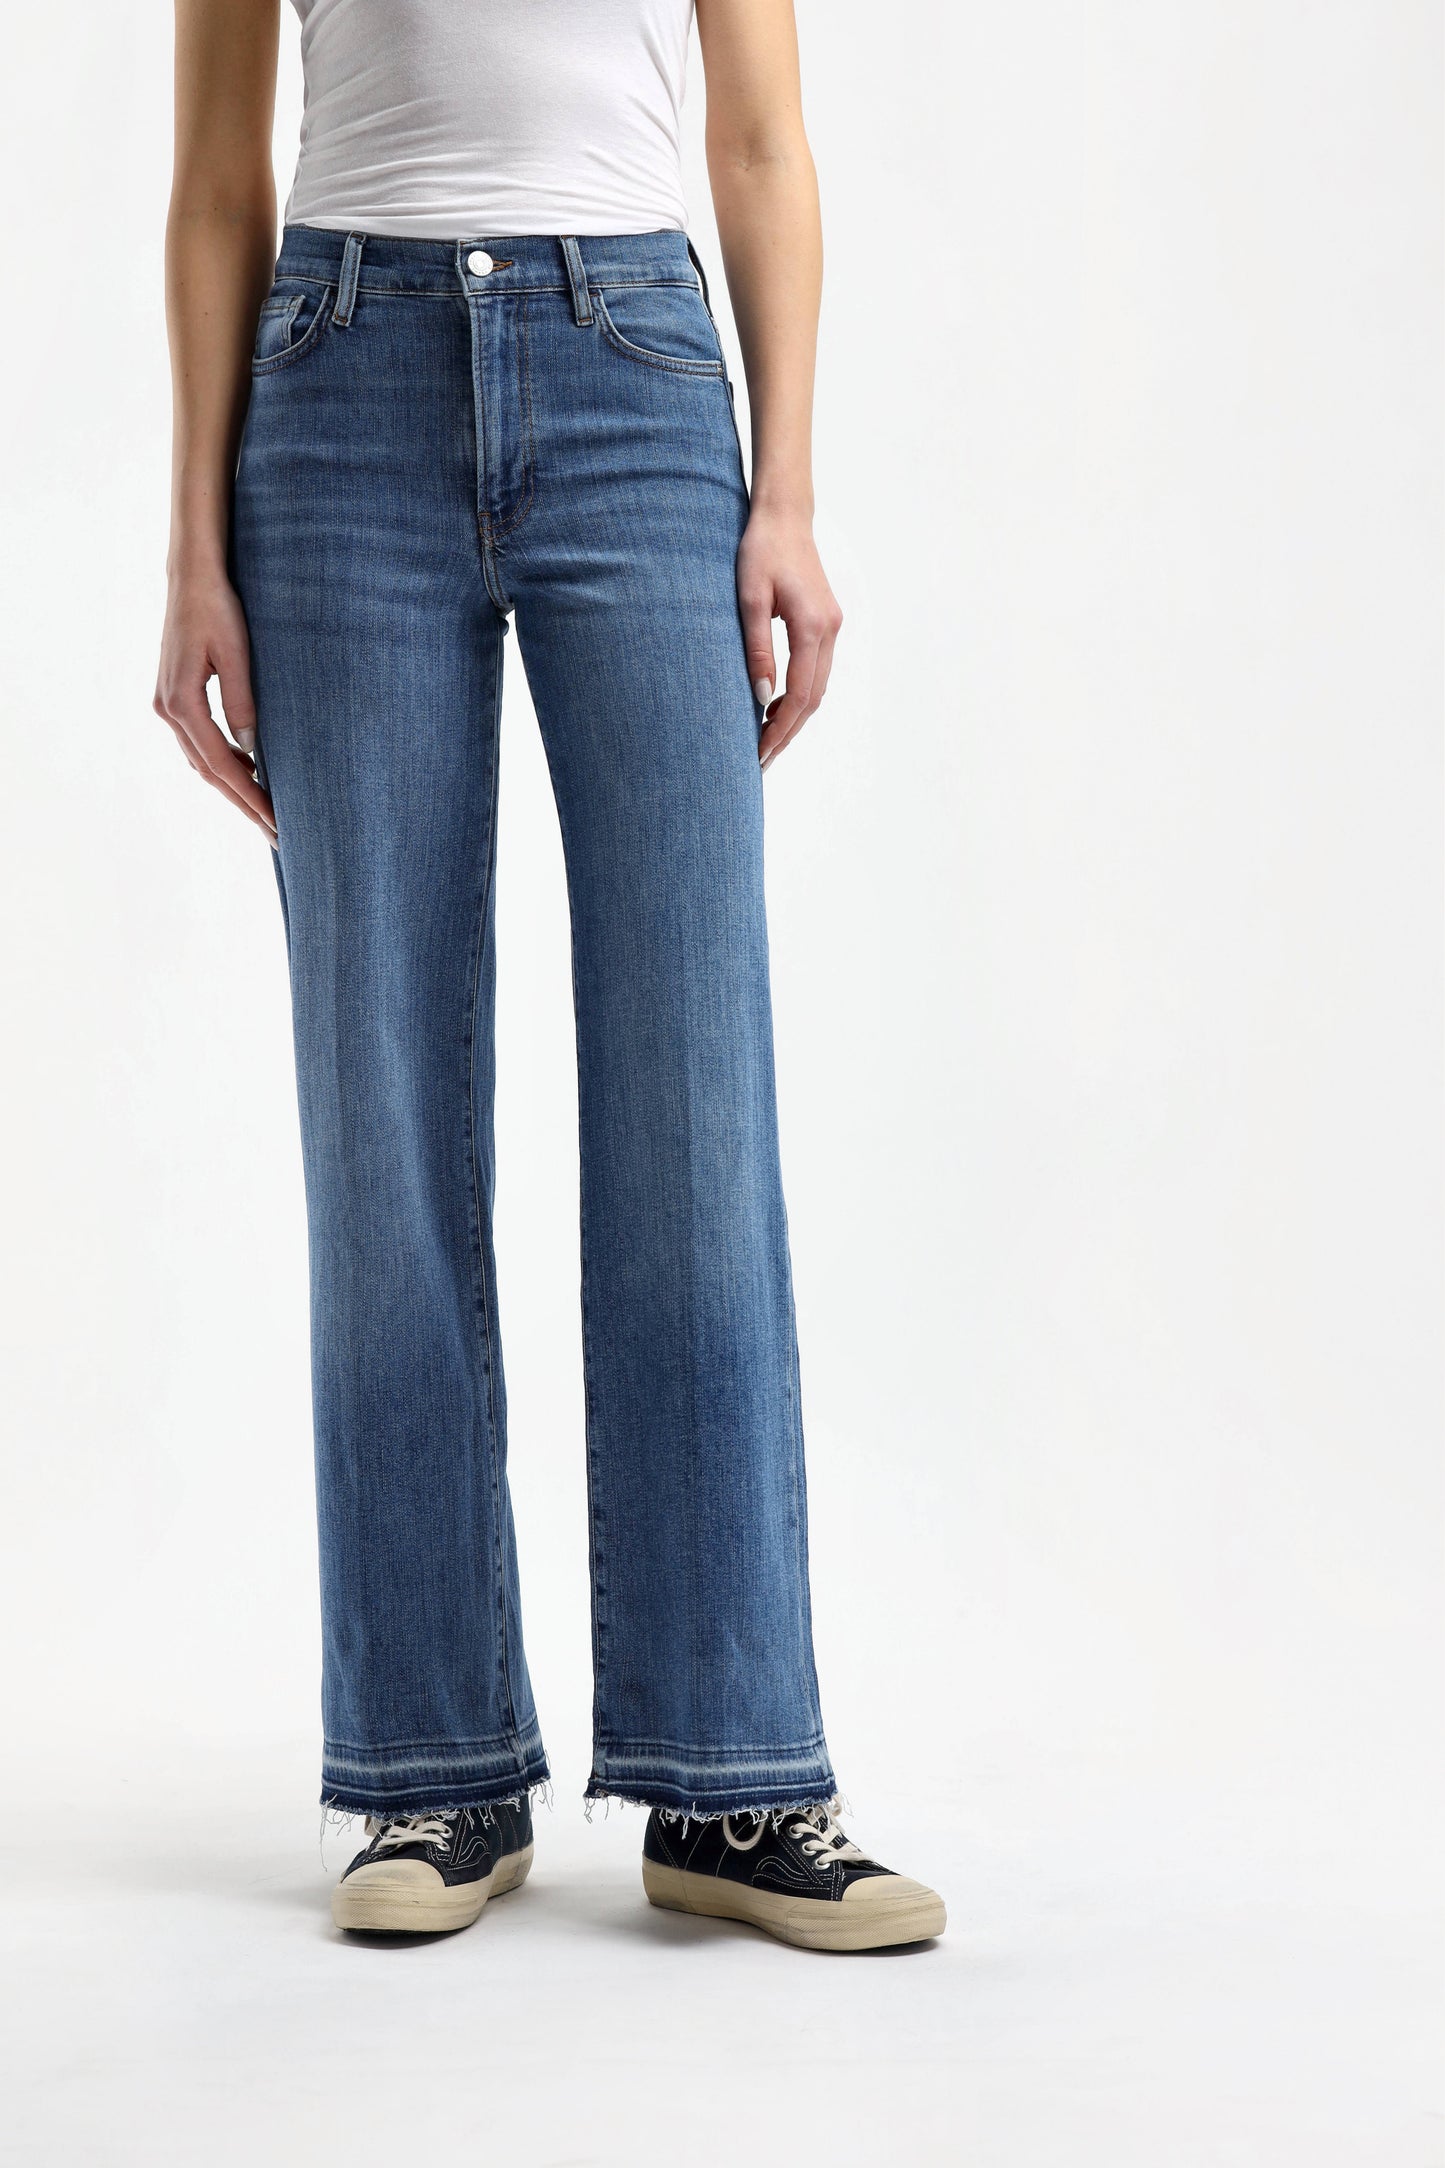 Jeans Le Slim Palazzo in JettyFrame - Anita Hass